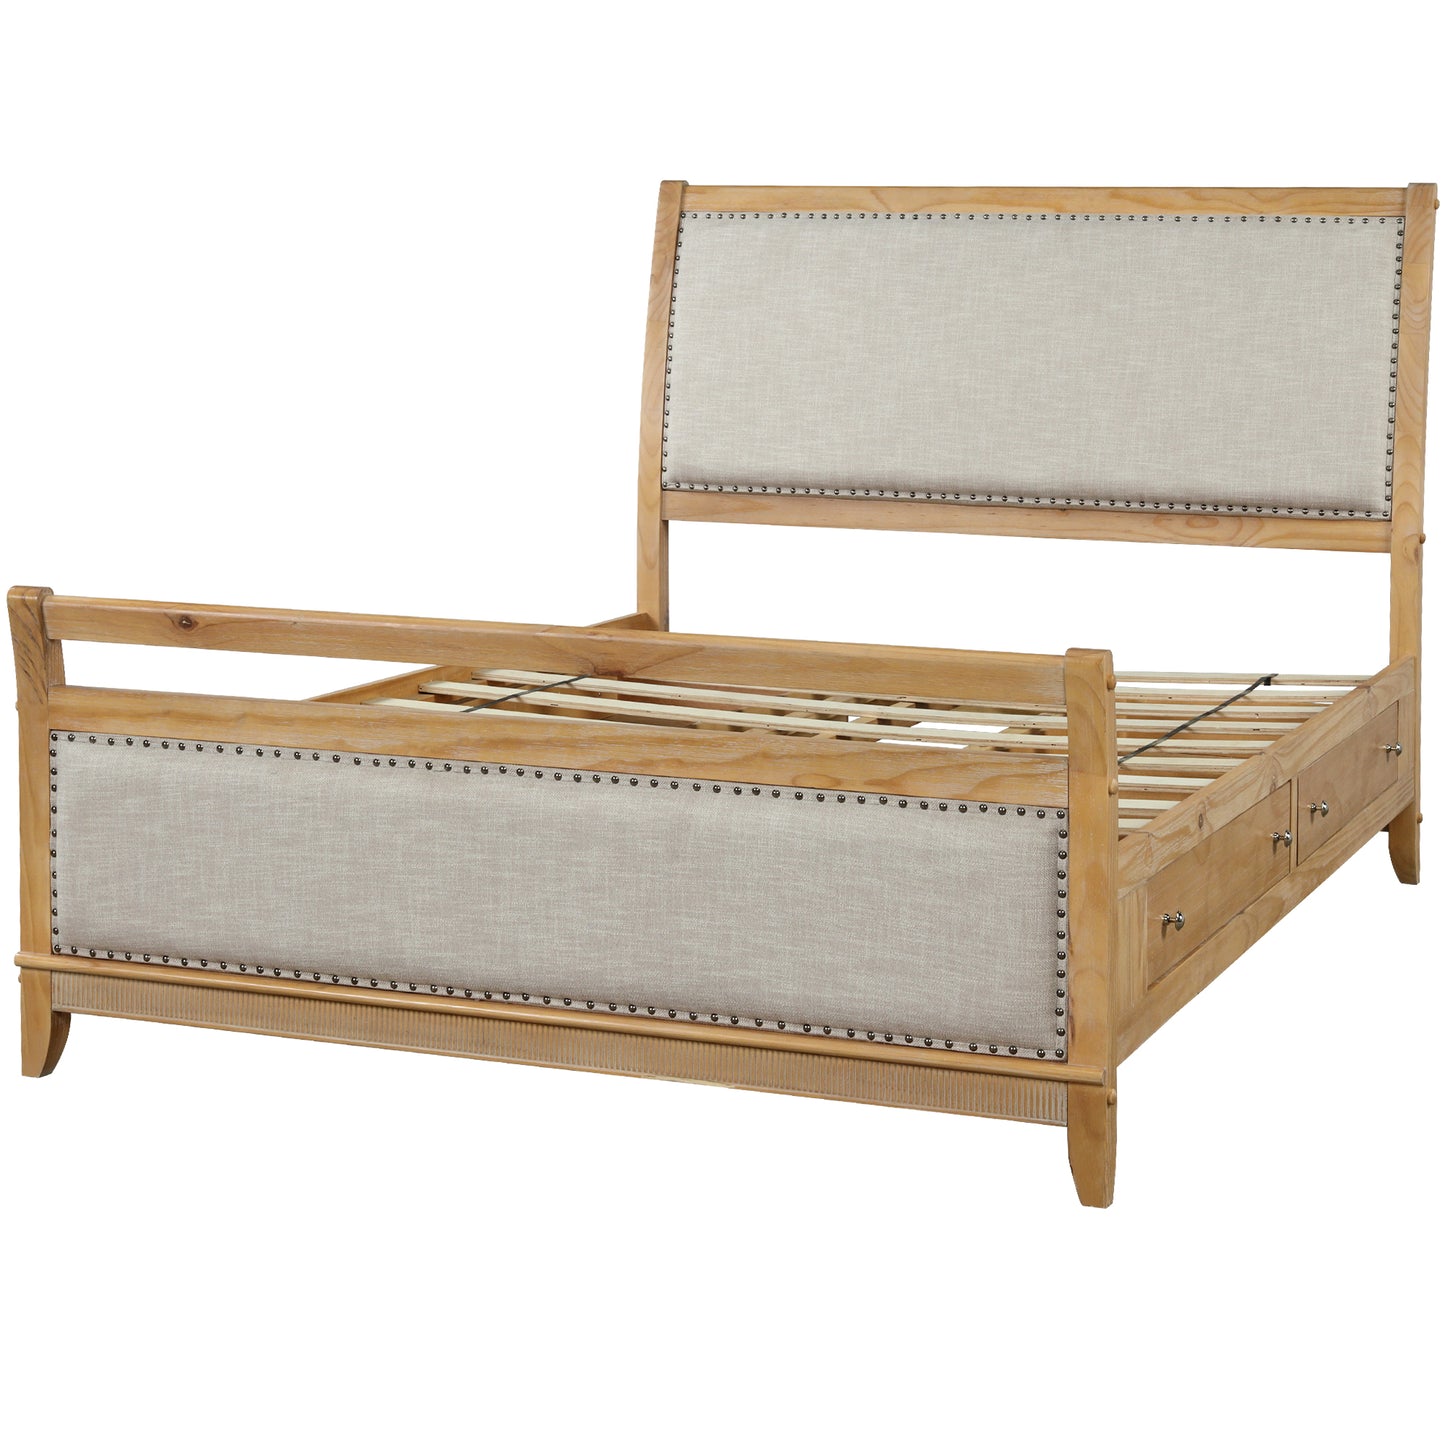 Hazel Upholstered and Wood Storage King Bed with 4 drawers